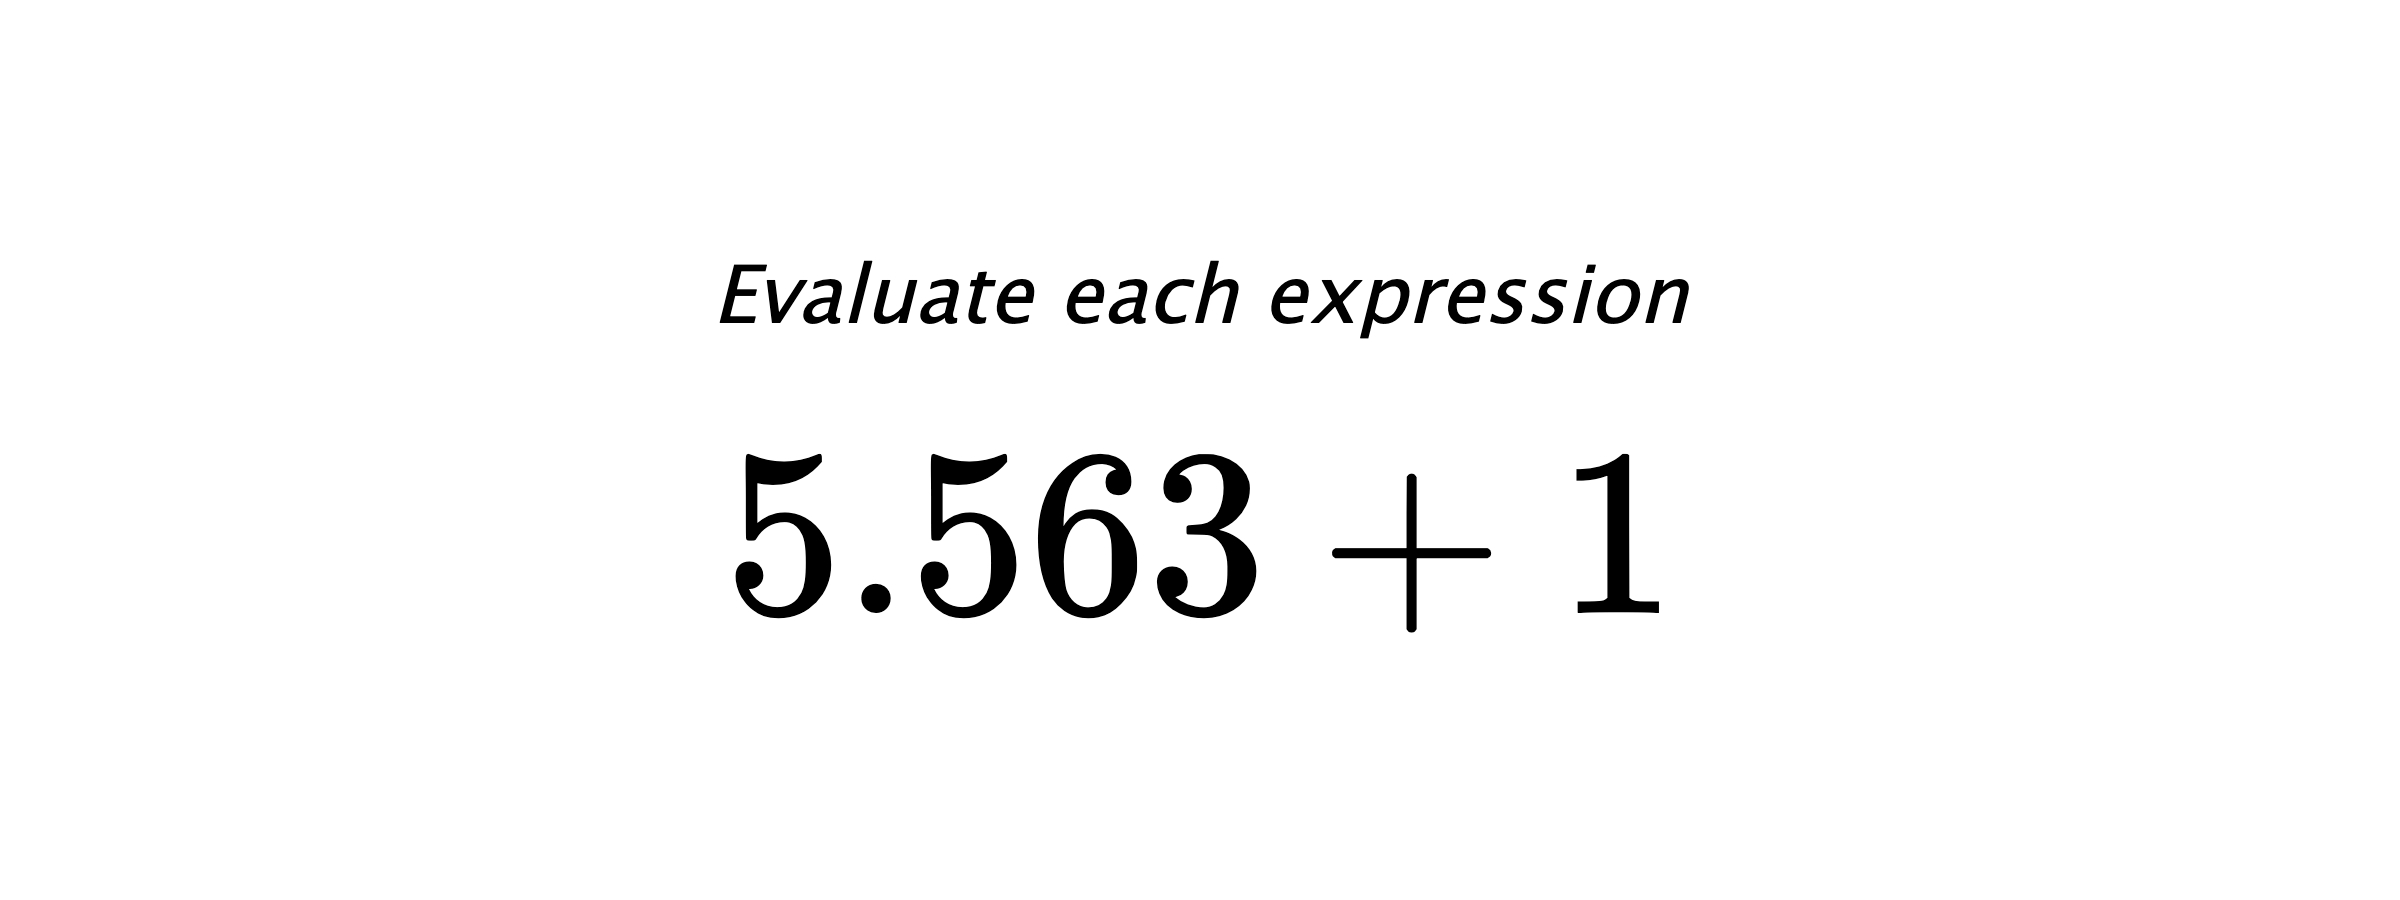 Evaluate each expression $ 5.563+1 $